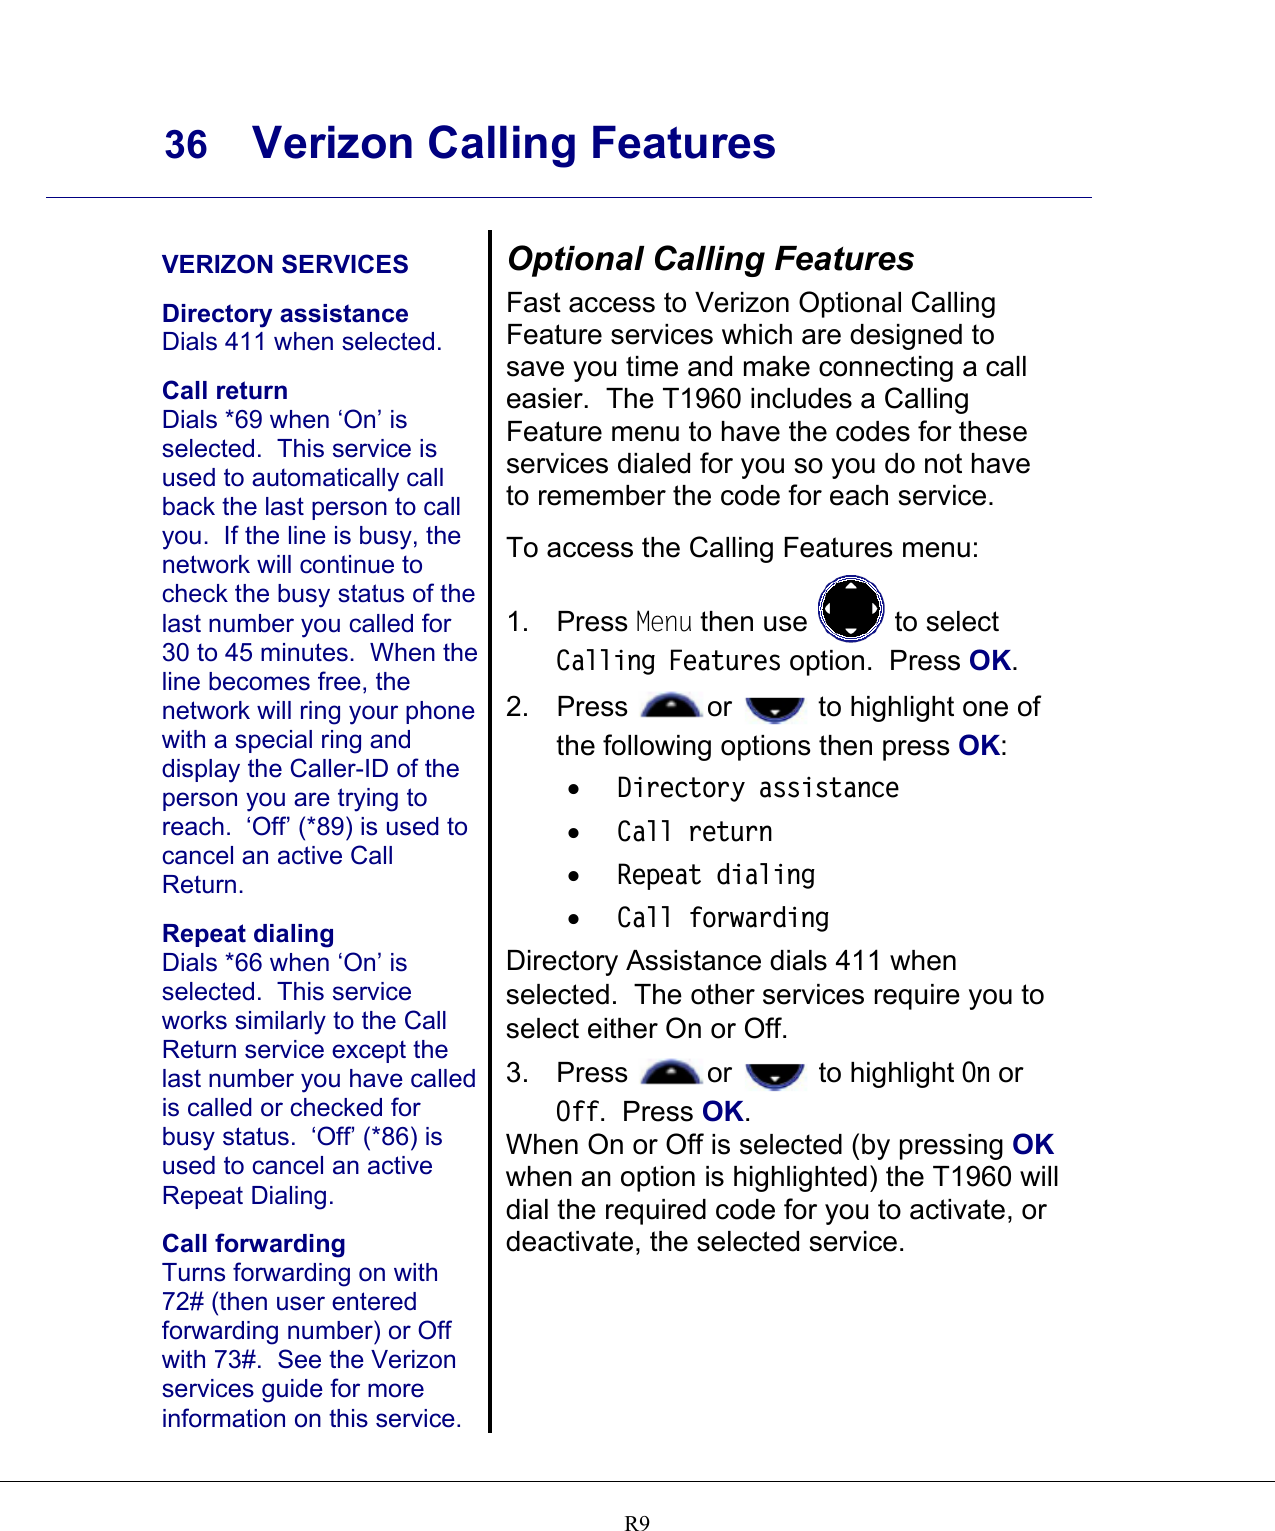     36 Verizon Calling Features    R9  VERIZON SERVICES  Directory assistance Dials 411 when selected.  Call return Dials *69 when ‘On’ is selected.  This service is used to automatically call back the last person to call you.  If the line is busy, the network will continue to check the busy status of the last number you called for 30 to 45 minutes.  When the line becomes free, the network will ring your phone with a special ring and display the Caller-ID of the person you are trying to reach.  ‘Off’ (*89) is used to cancel an active Call Return.  Repeat dialing Dials *66 when ‘On’ is selected.  This service works similarly to the Call Return service except the last number you have called is called or checked for busy status.  ‘Off’ (*86) is used to cancel an active Repeat Dialing.  Call forwarding Turns forwarding on with 72# (then user entered forwarding number) or Off with 73#.  See the Verizon services guide for more information on this service. Optional Calling Features Fast access to Verizon Optional Calling Feature services which are designed to save you time and make connecting a call easier.  The T1960 includes a Calling Feature menu to have the codes for these services dialed for you so you do not have to remember the code for each service.  To access the Calling Features menu: 1. Press Menu then use   to select Calling Features option.  Press OK. 2. Press  or   to highlight one of the following options then press OK: •  Directory assistance •  Call return •  Repeat dialing •  Call forwarding Directory Assistance dials 411 when selected.  The other services require you to select either On or Off.   3. Press  or   to highlight On or Off.  Press OK. When On or Off is selected (by pressing OK when an option is highlighted) the T1960 will dial the required code for you to activate, or deactivate, the selected service.  